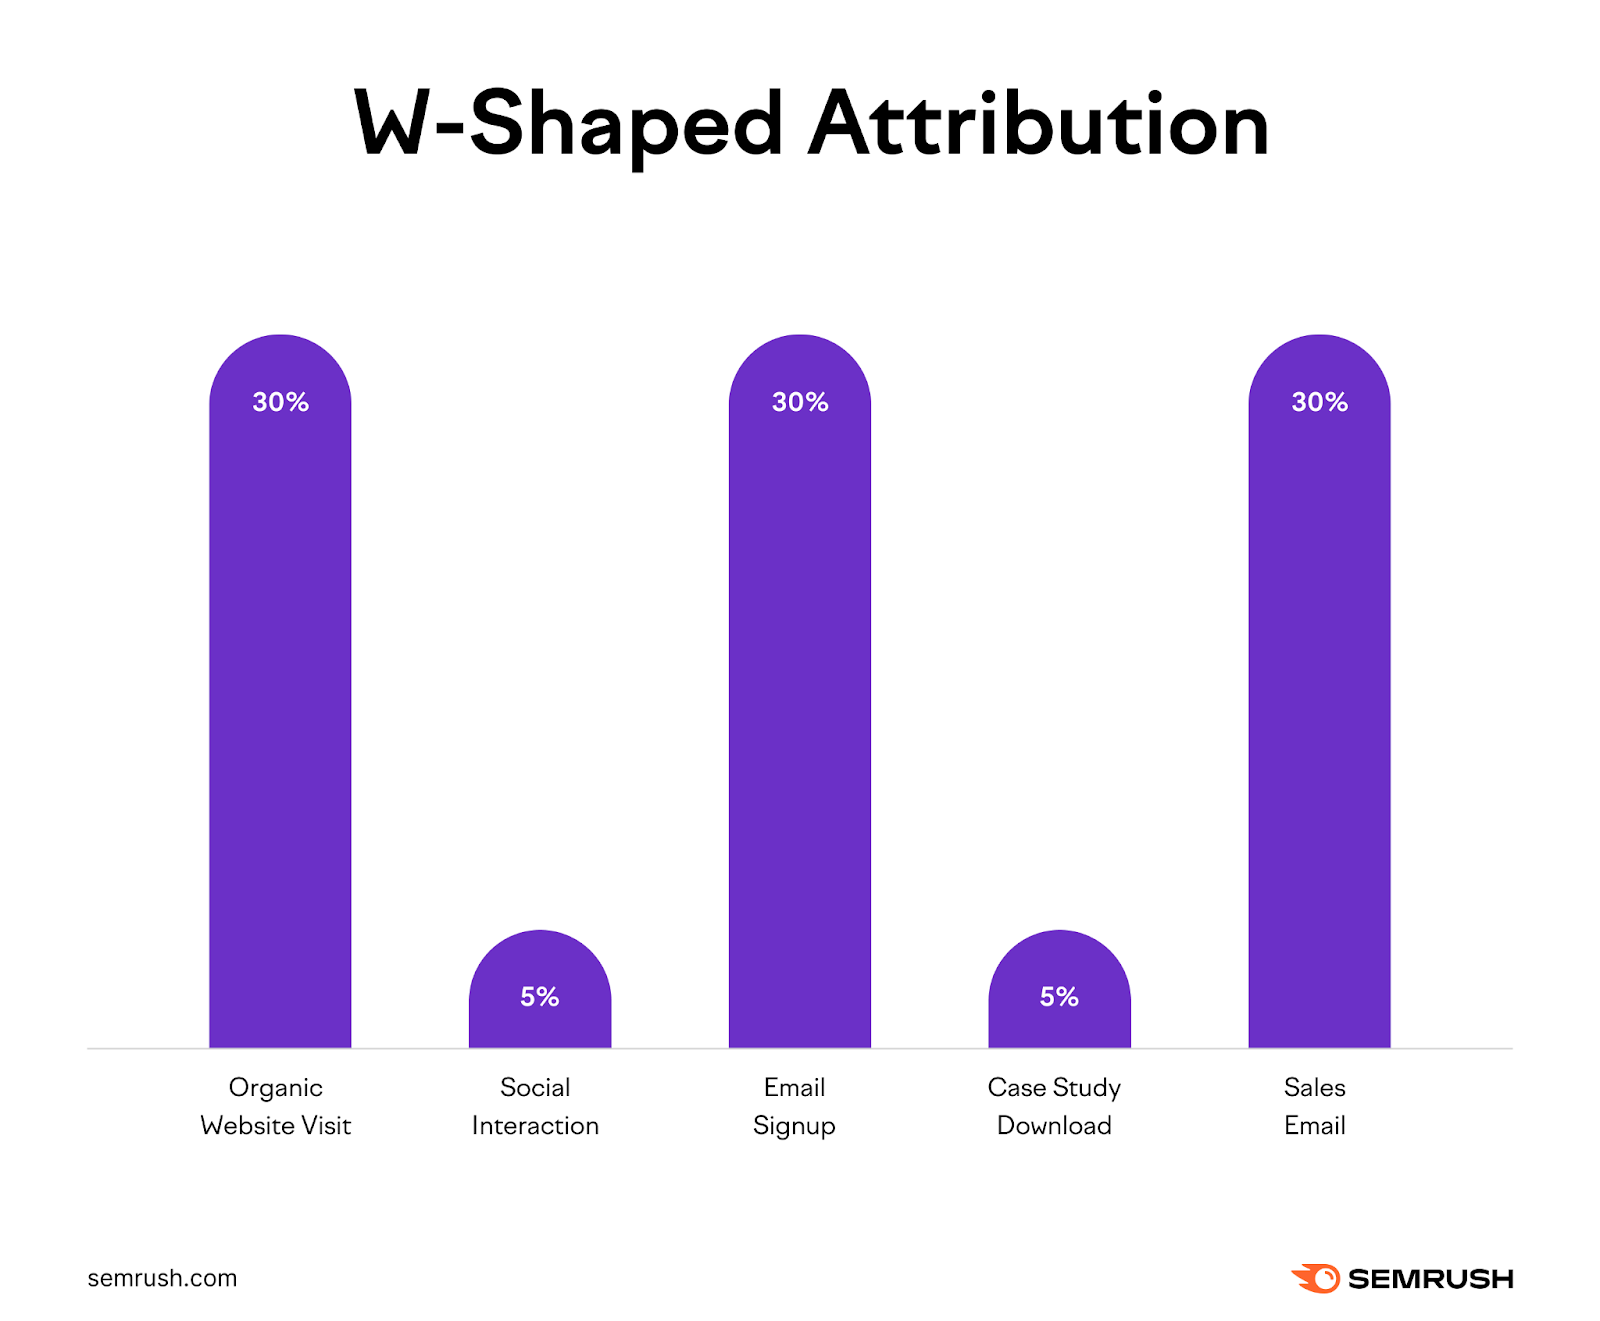 W-shaped attribution assigns 30% of the recognition  to the first, middle, and past  touchpoints, with the remaining recognition  dispersed  crossed  the different   touchpoints.